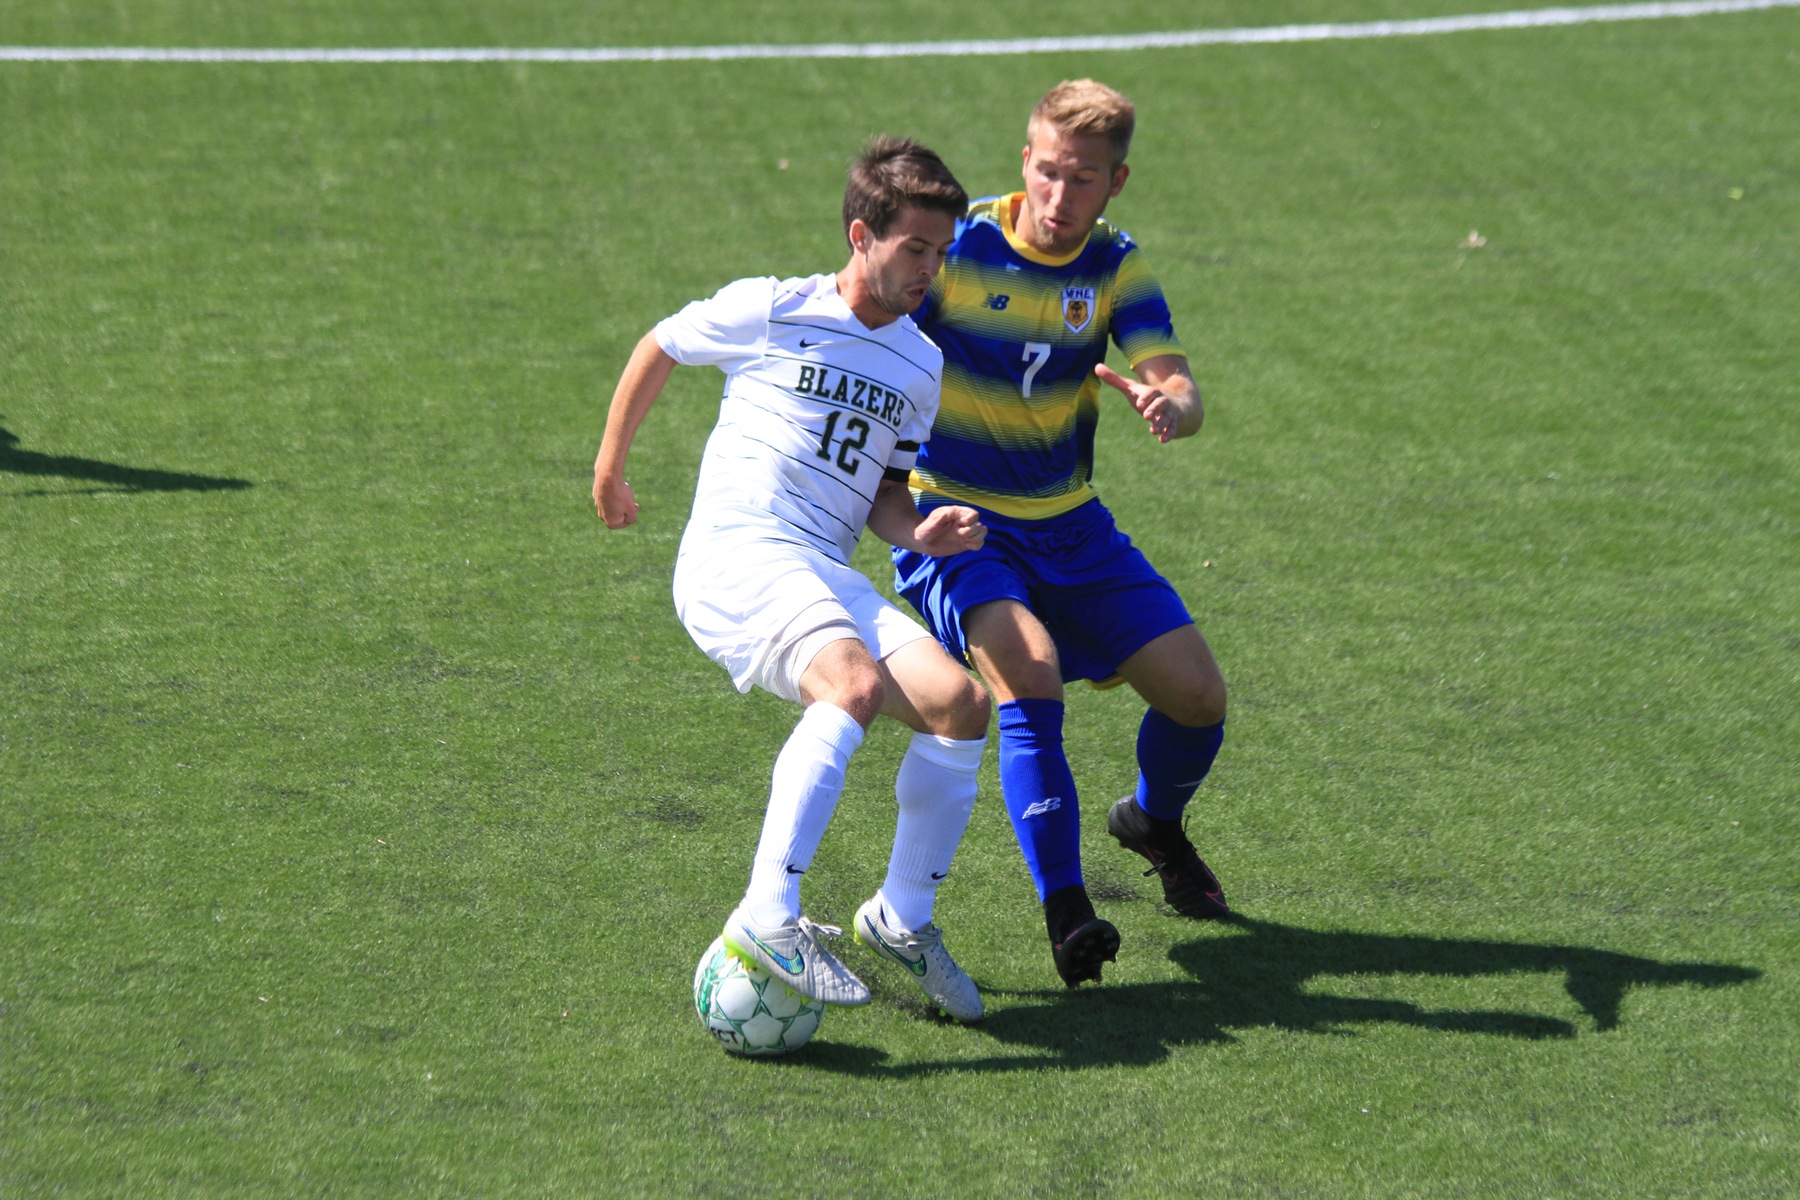 Western New England Overpowers Men's Soccer